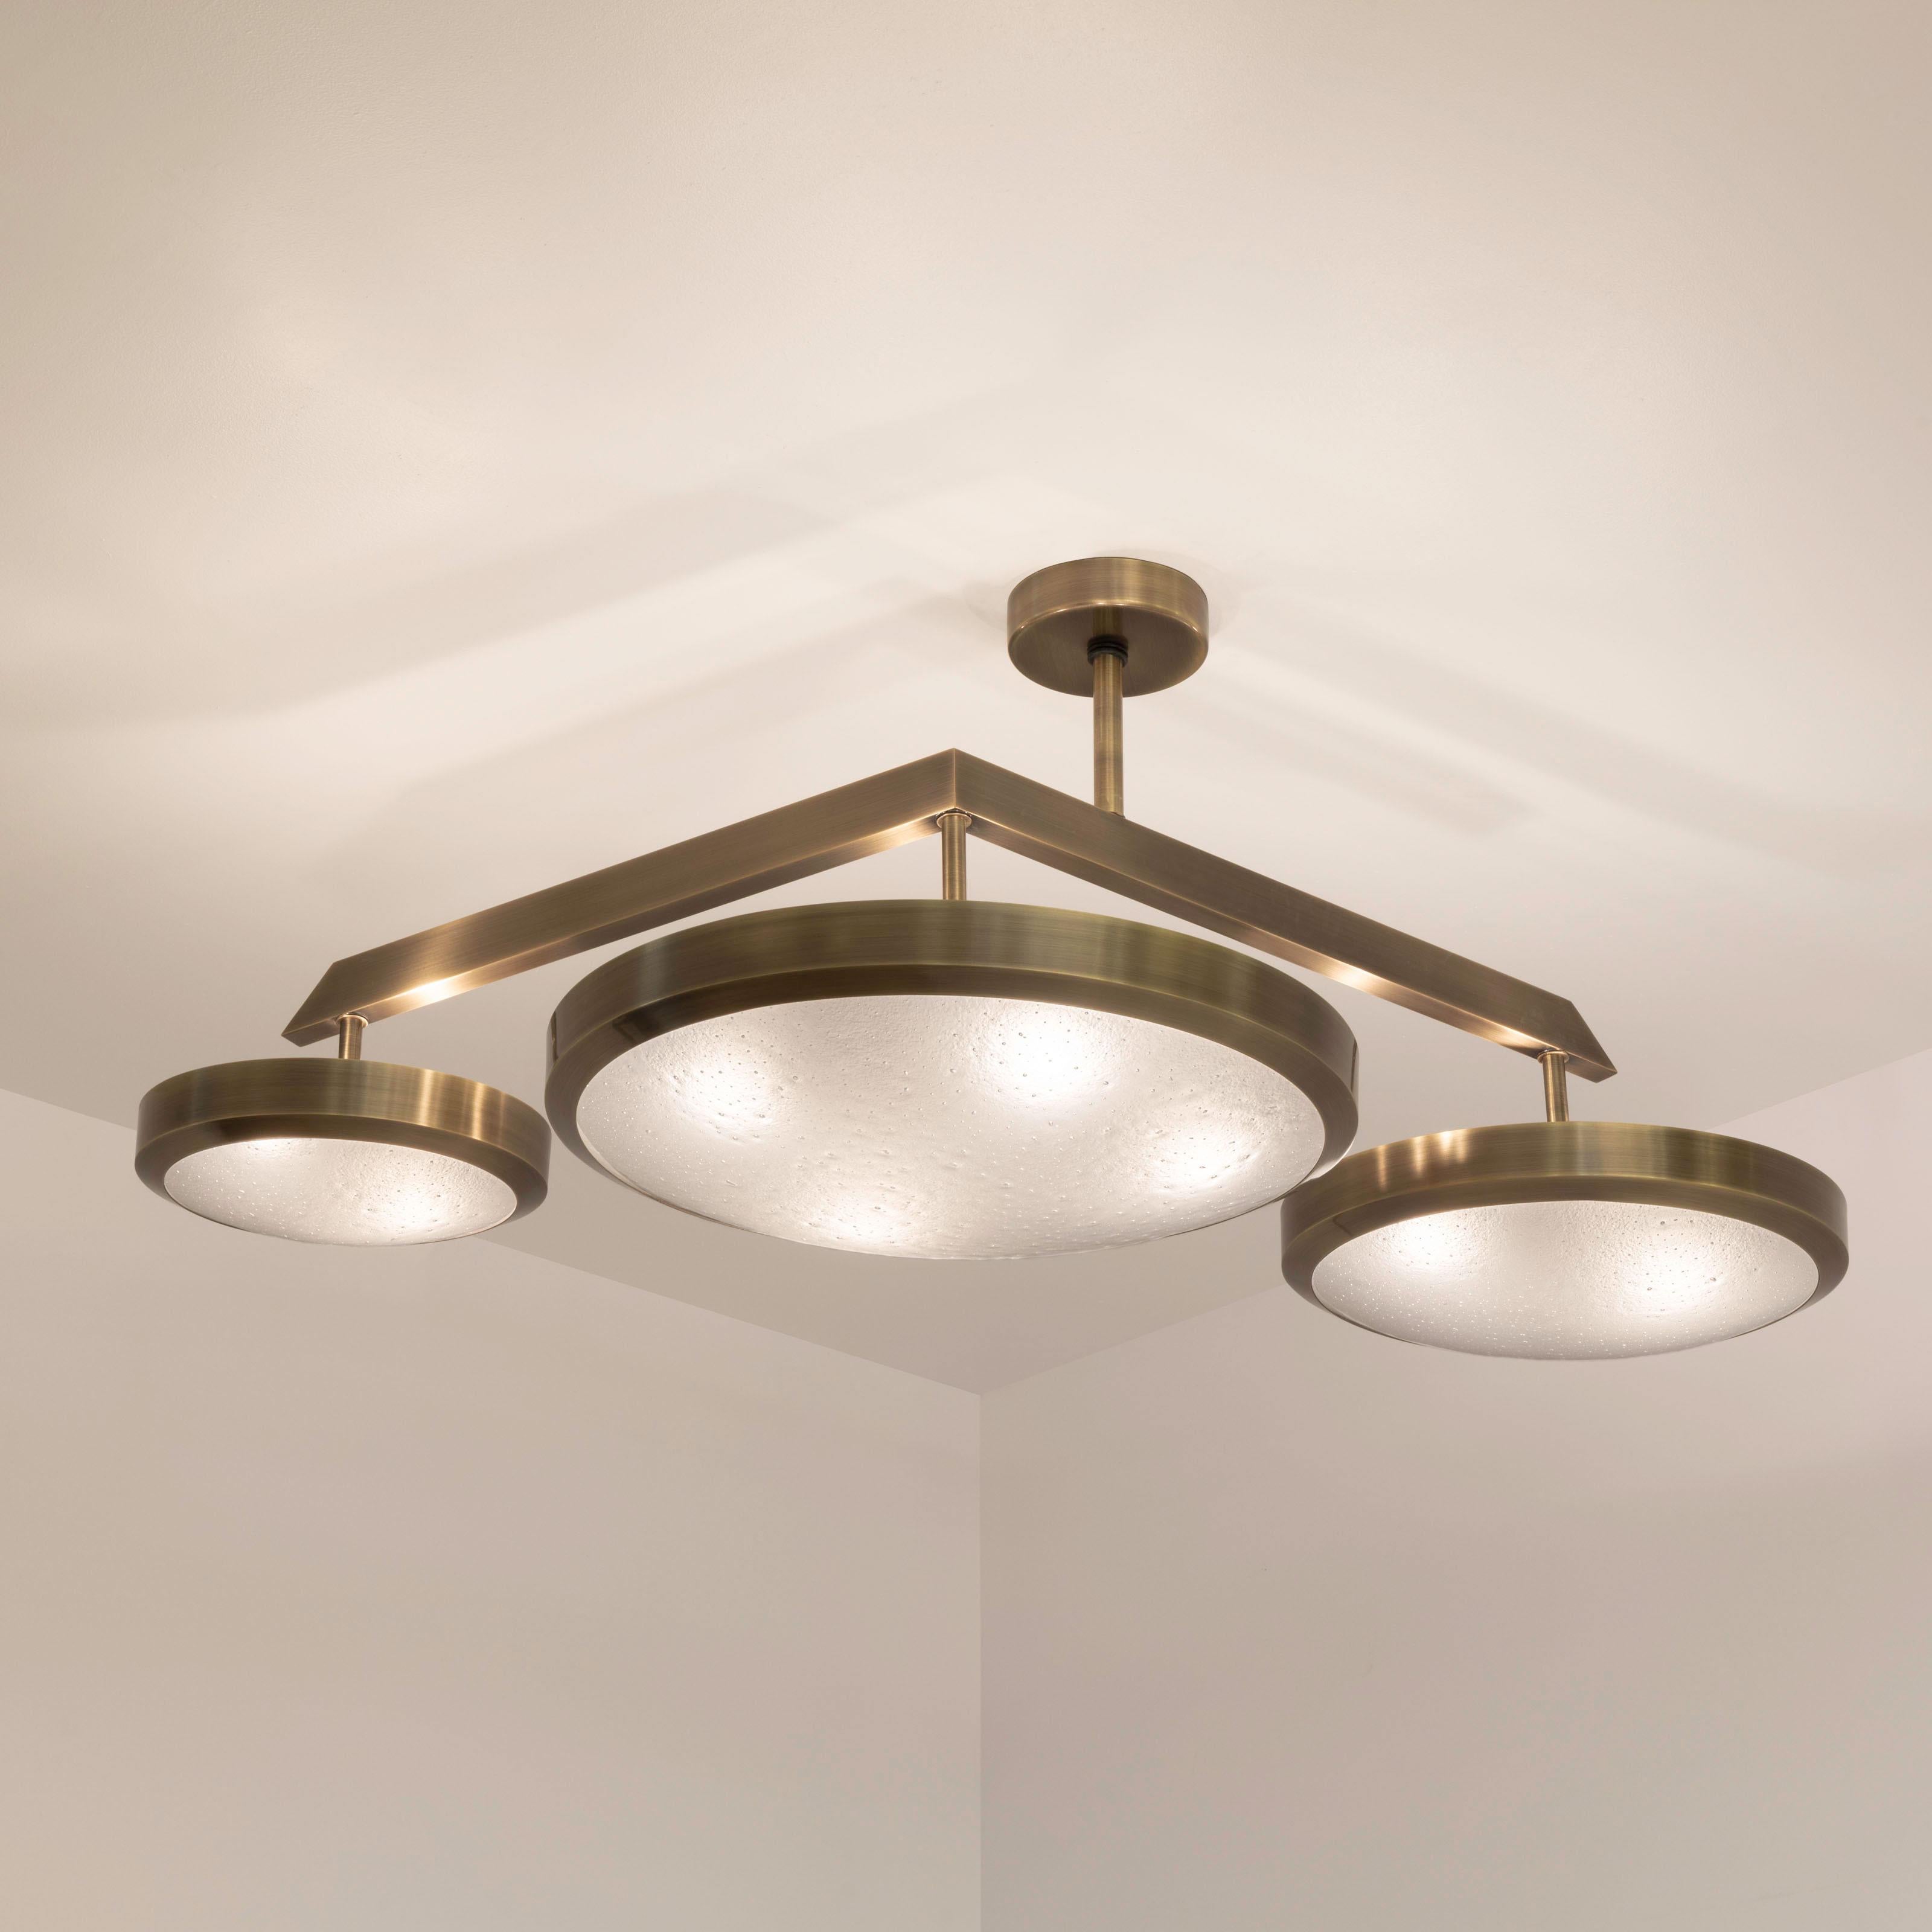 Zeta Ceiling Light by Gaspare Asaro - Bronze Finish In New Condition For Sale In New York, NY